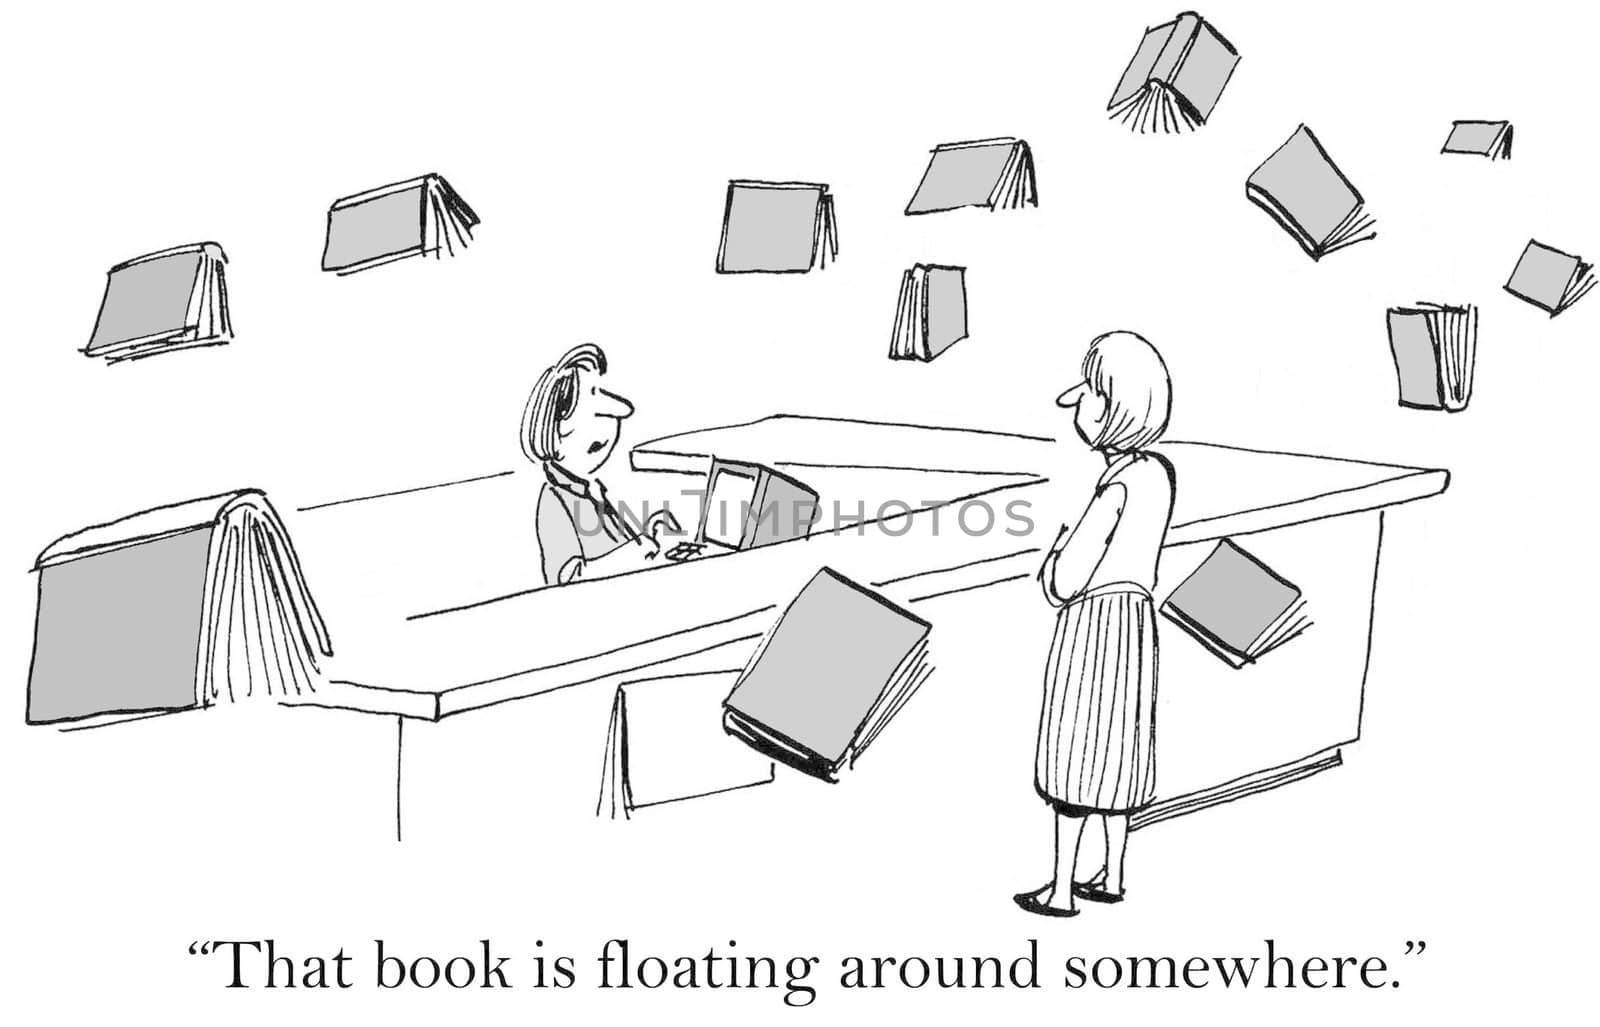 "That book is floating around somewhere."